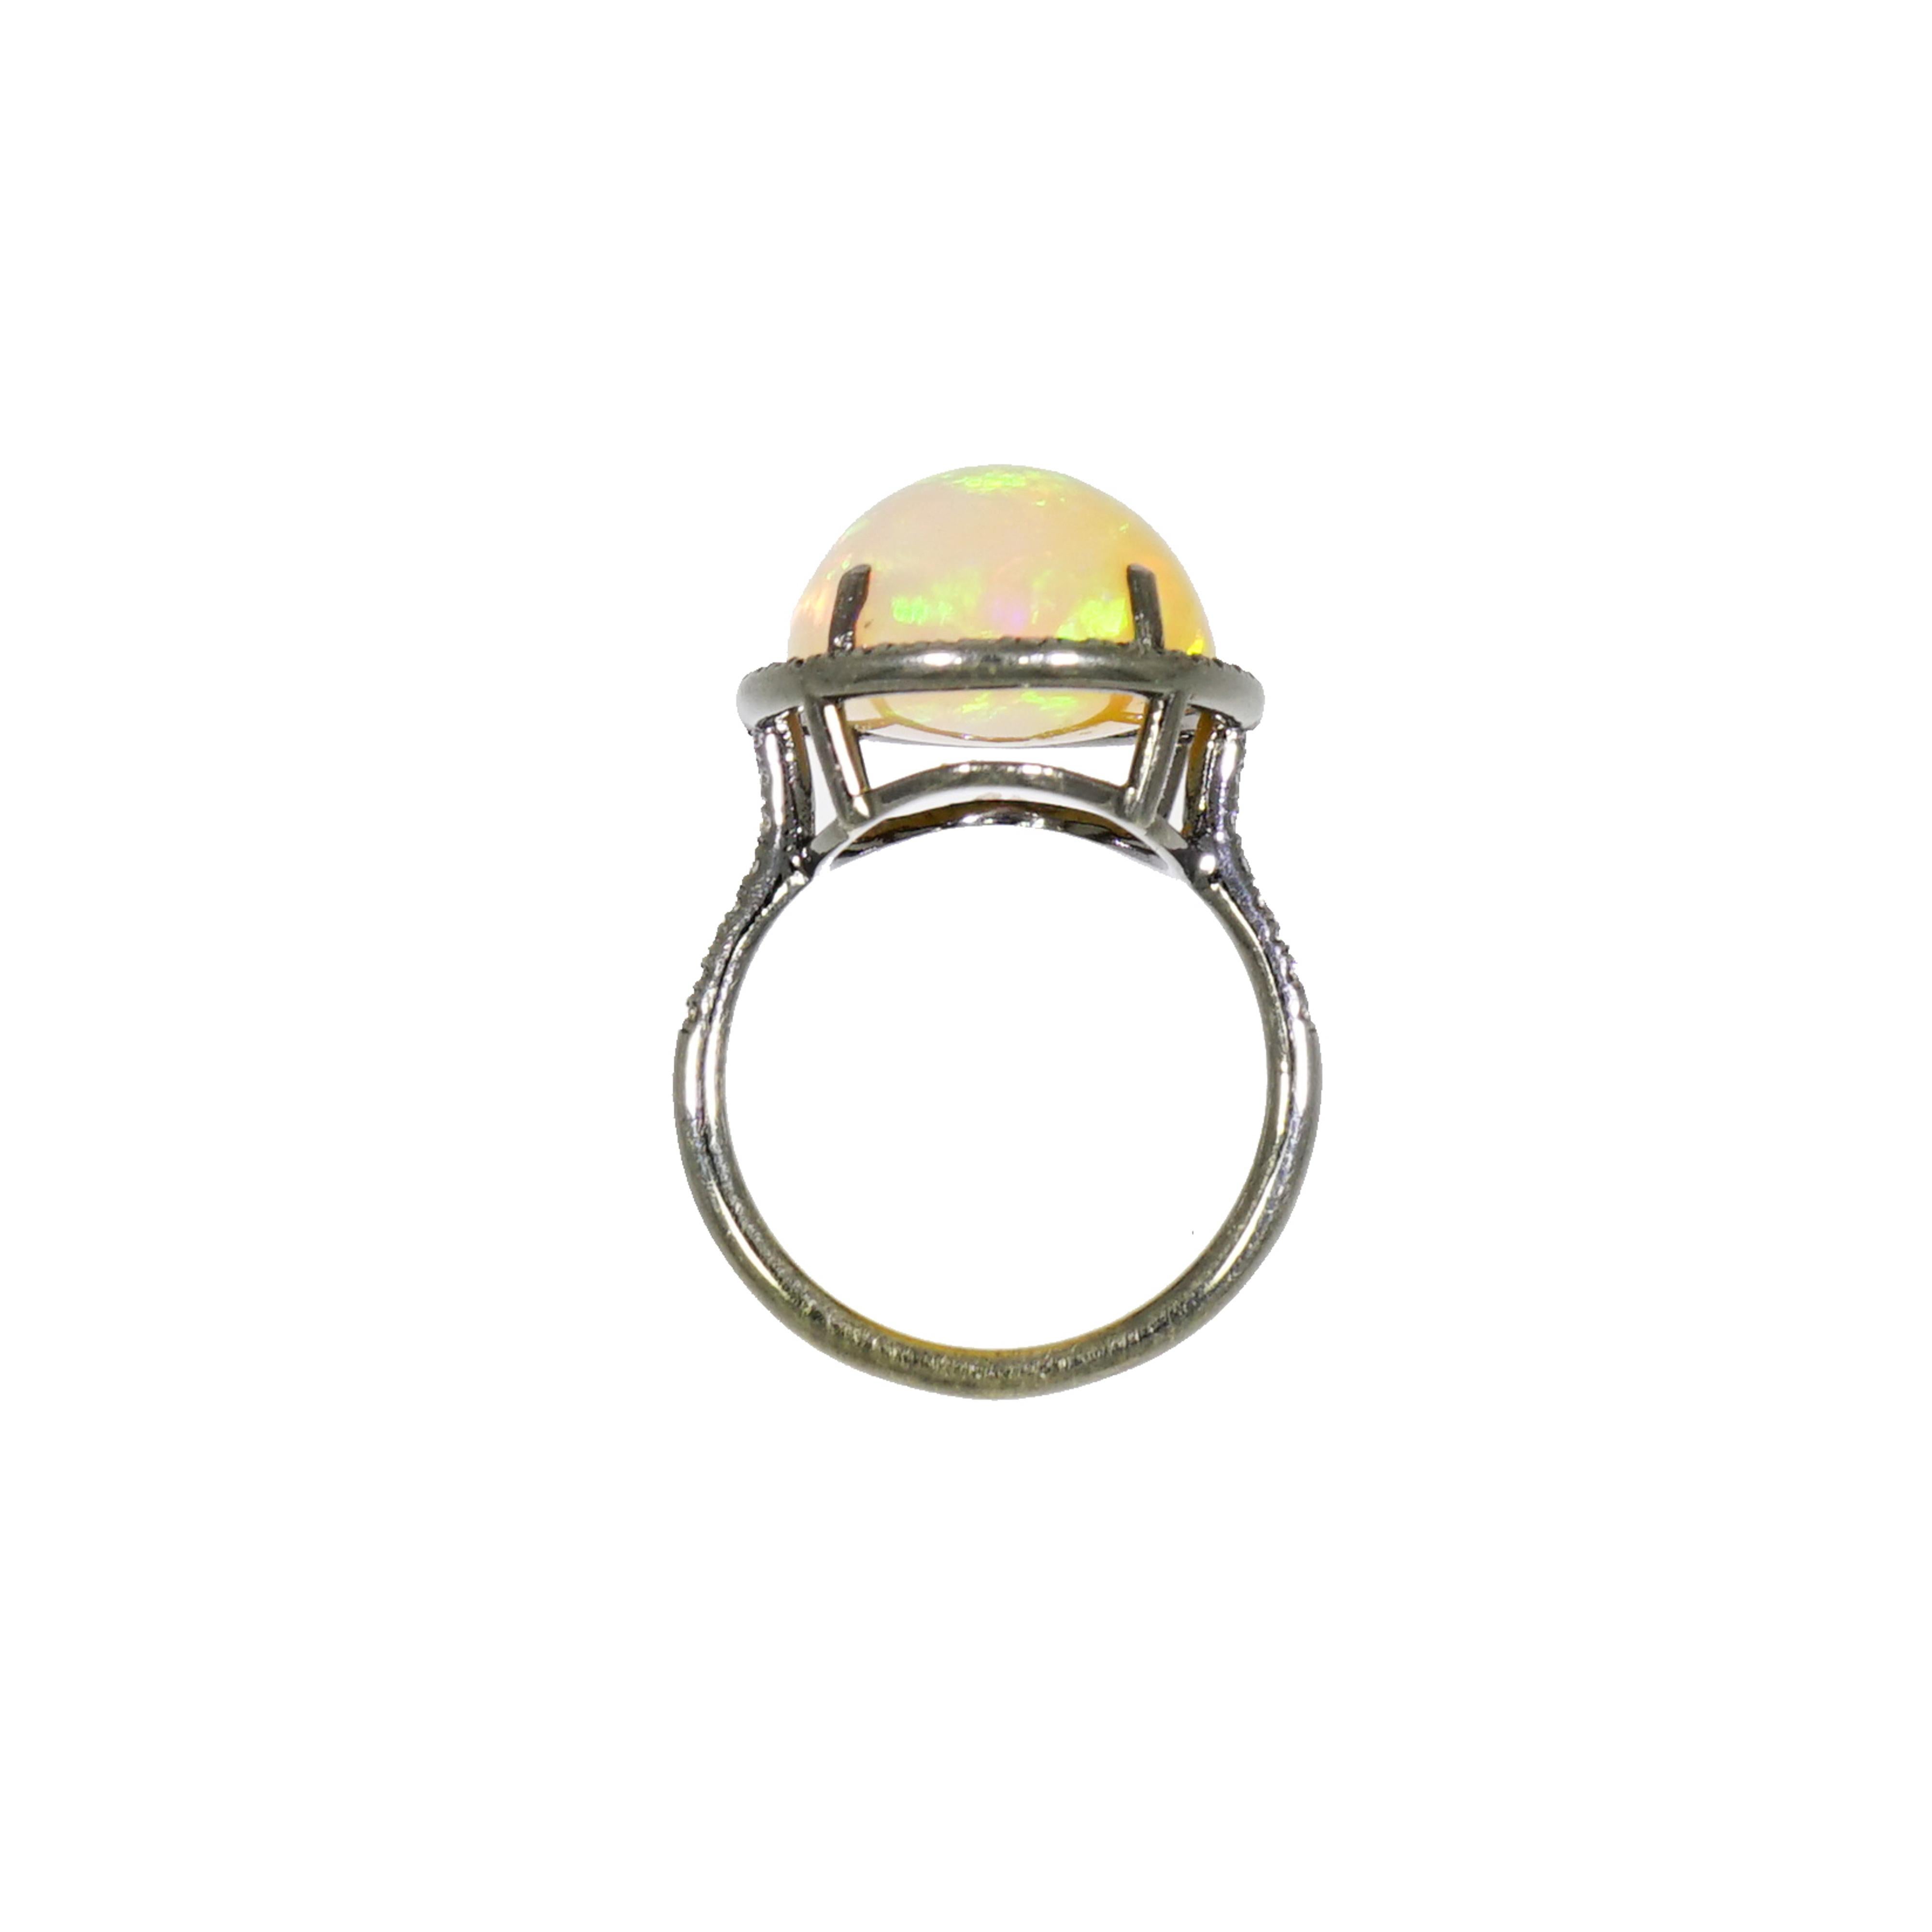 Opal is the unsung hero of the semi-precious gemstone group. Lauren K designed this ring with a sheen and airiness, rhodium plated in black to add contrast and make statement... definitely trending at the moment.
Crafted in NYC with 18k white gold